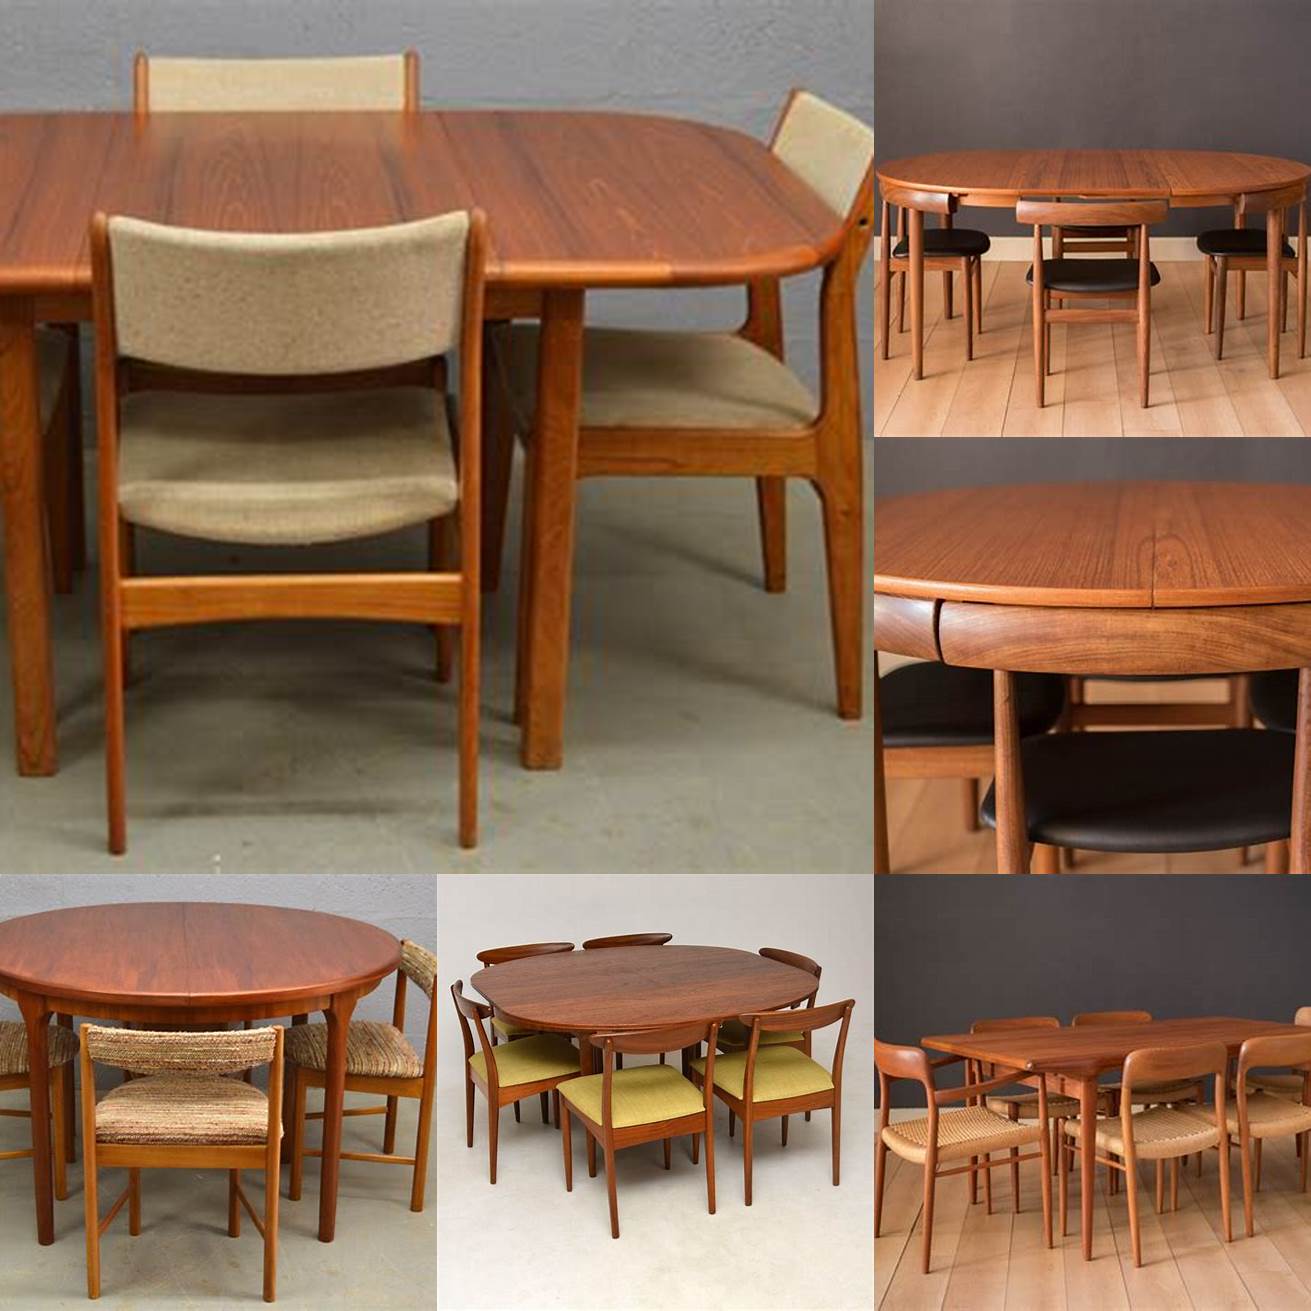 Classic Teak Table and Chairs